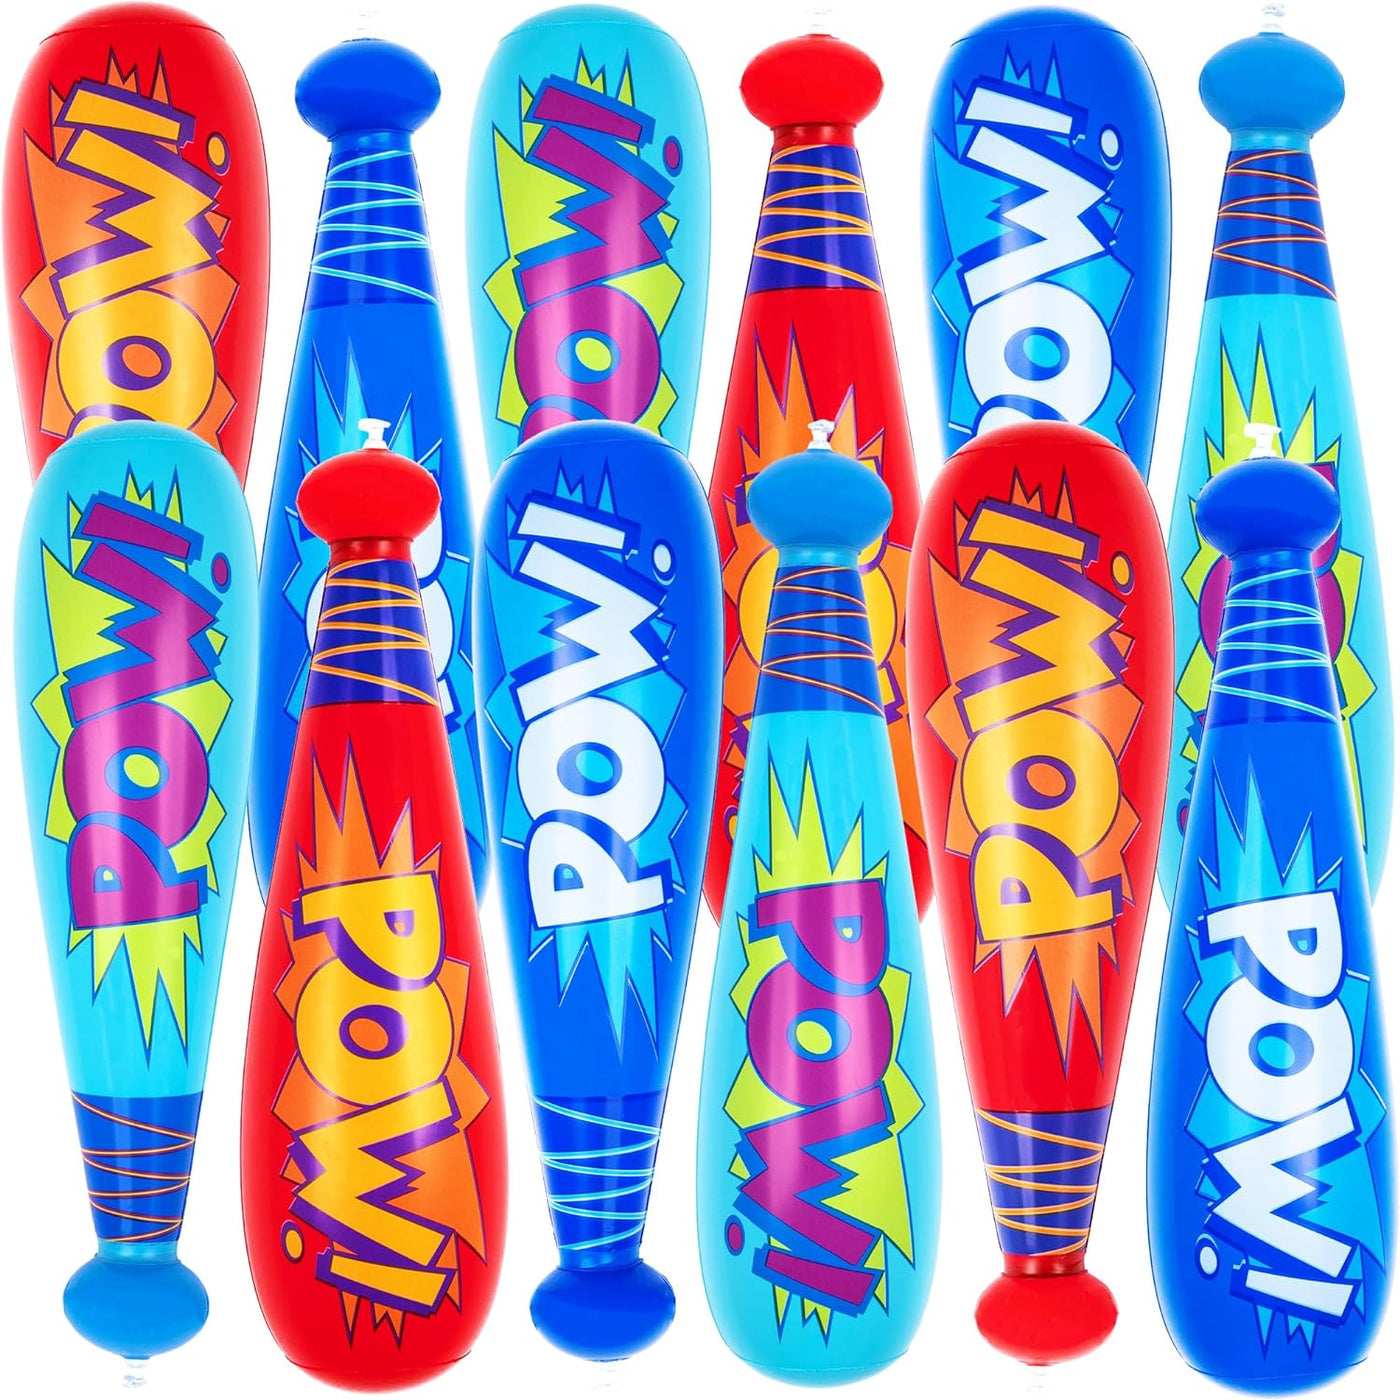 ArtCreativity 20 Inch Pow Inflatable Baseball Bats, (Pack of 12), Baseball Goodie Bags Favors & Superhero Birthday Boy Party Favors, Inflatable Toys for Kids, Carnival Party Prizes for Kids